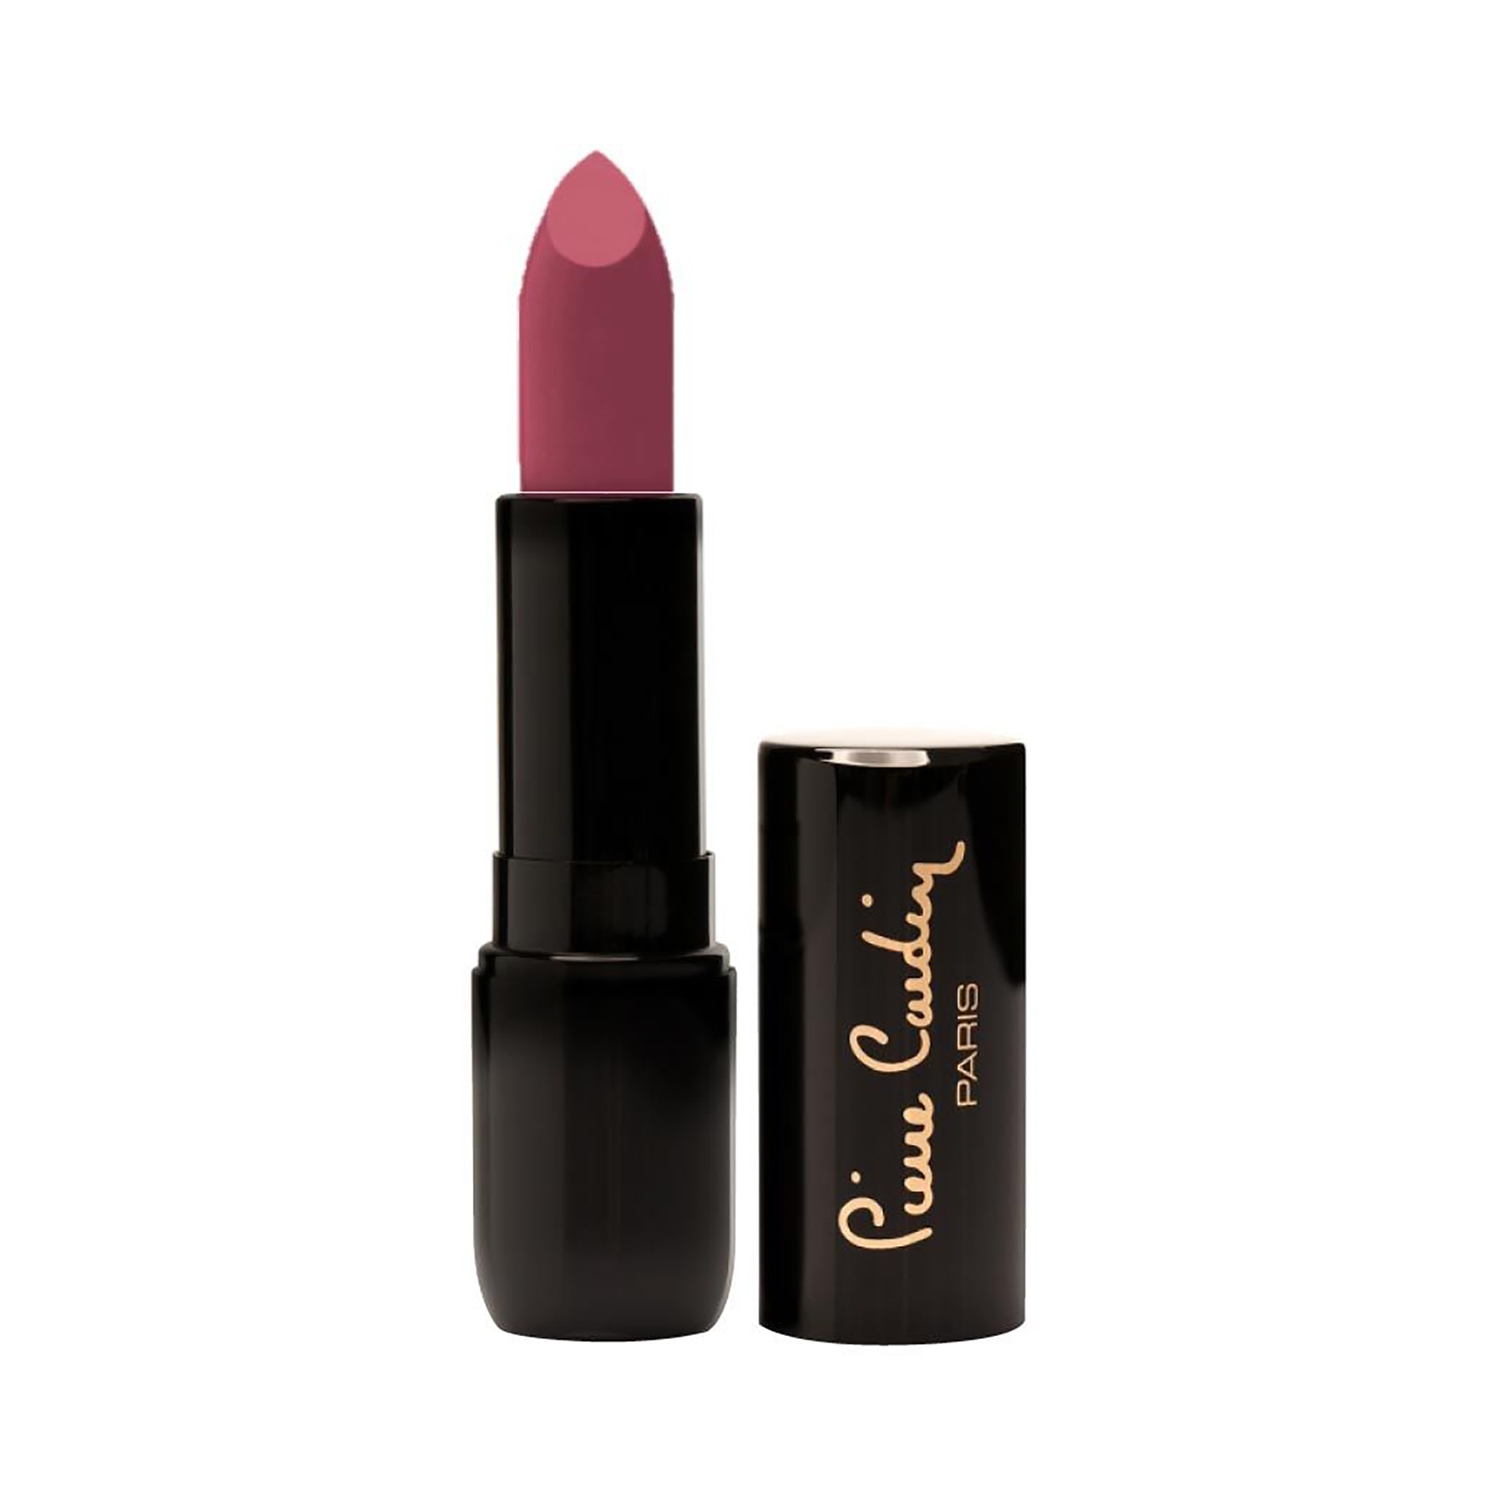 Pierre Cardin Paris | Pierre Cardin Paris Porcelain Edition Rouge Lipstick - 228 Spice Rose (4g)